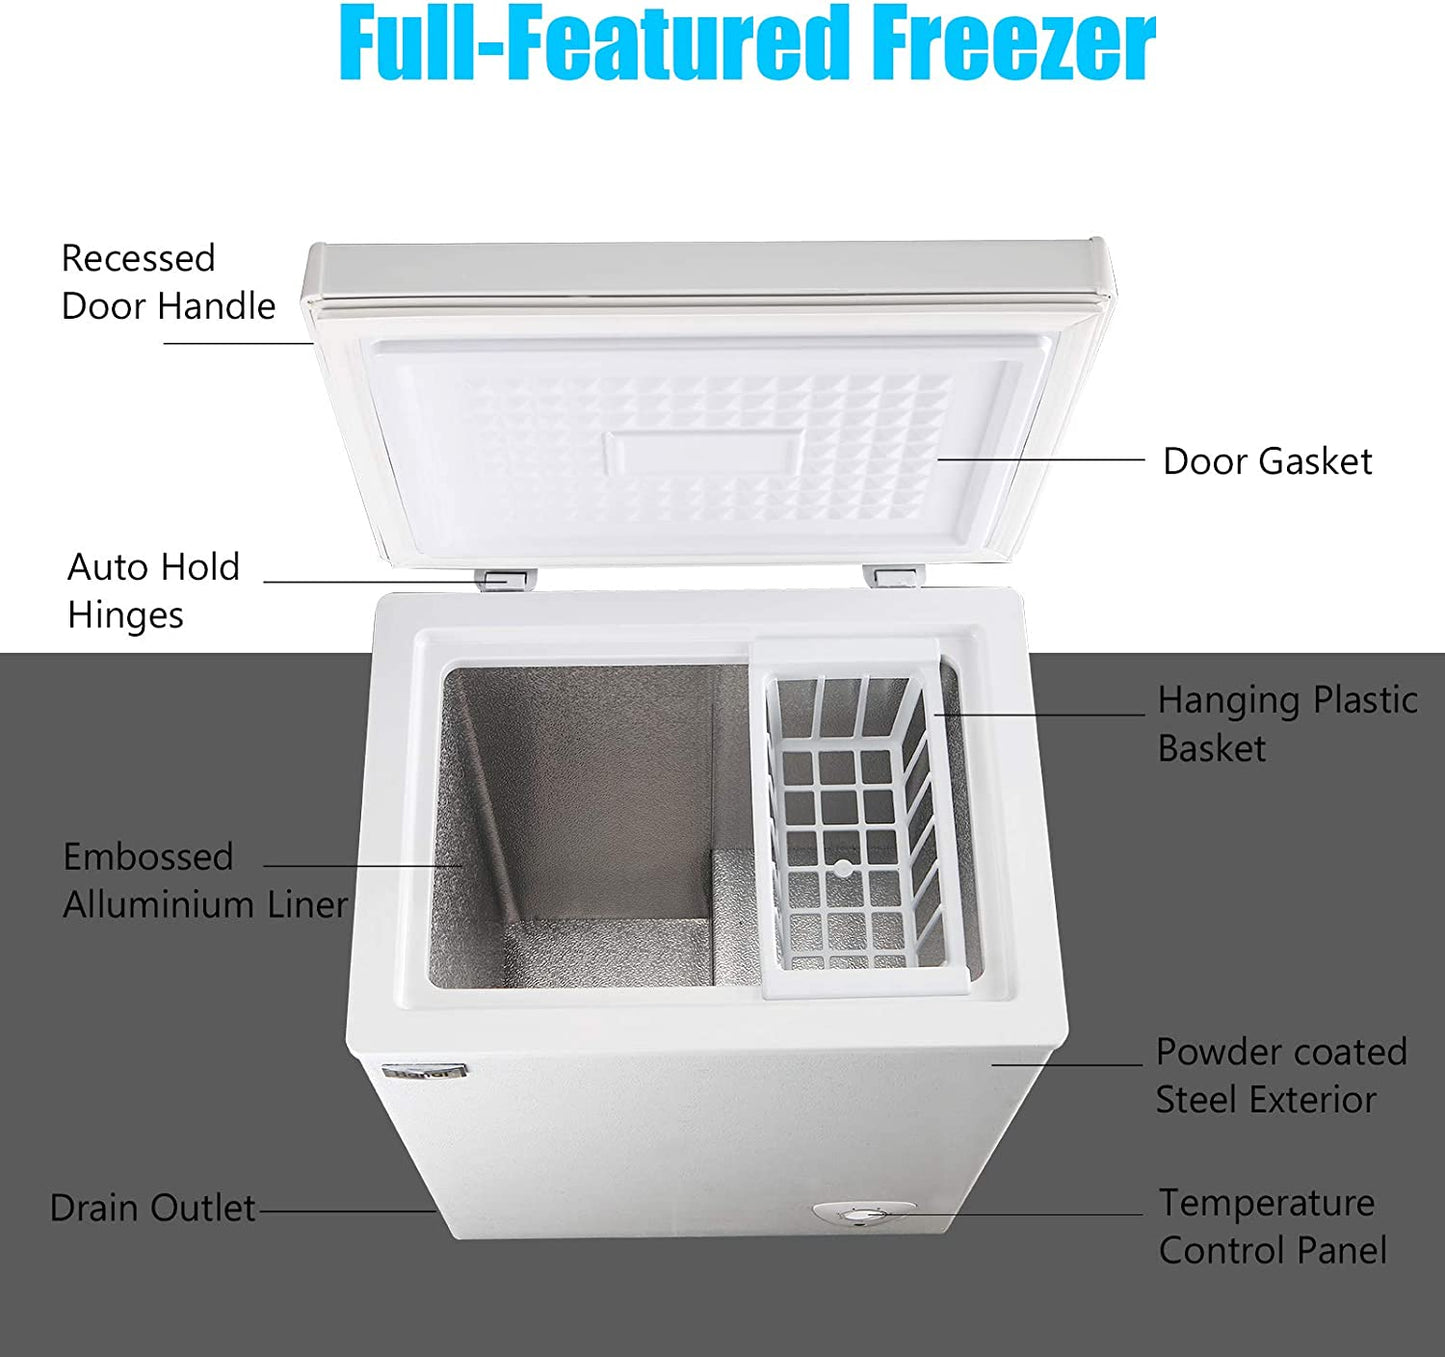 Cubic Chest Freezer Feet with Removable Storage Basket